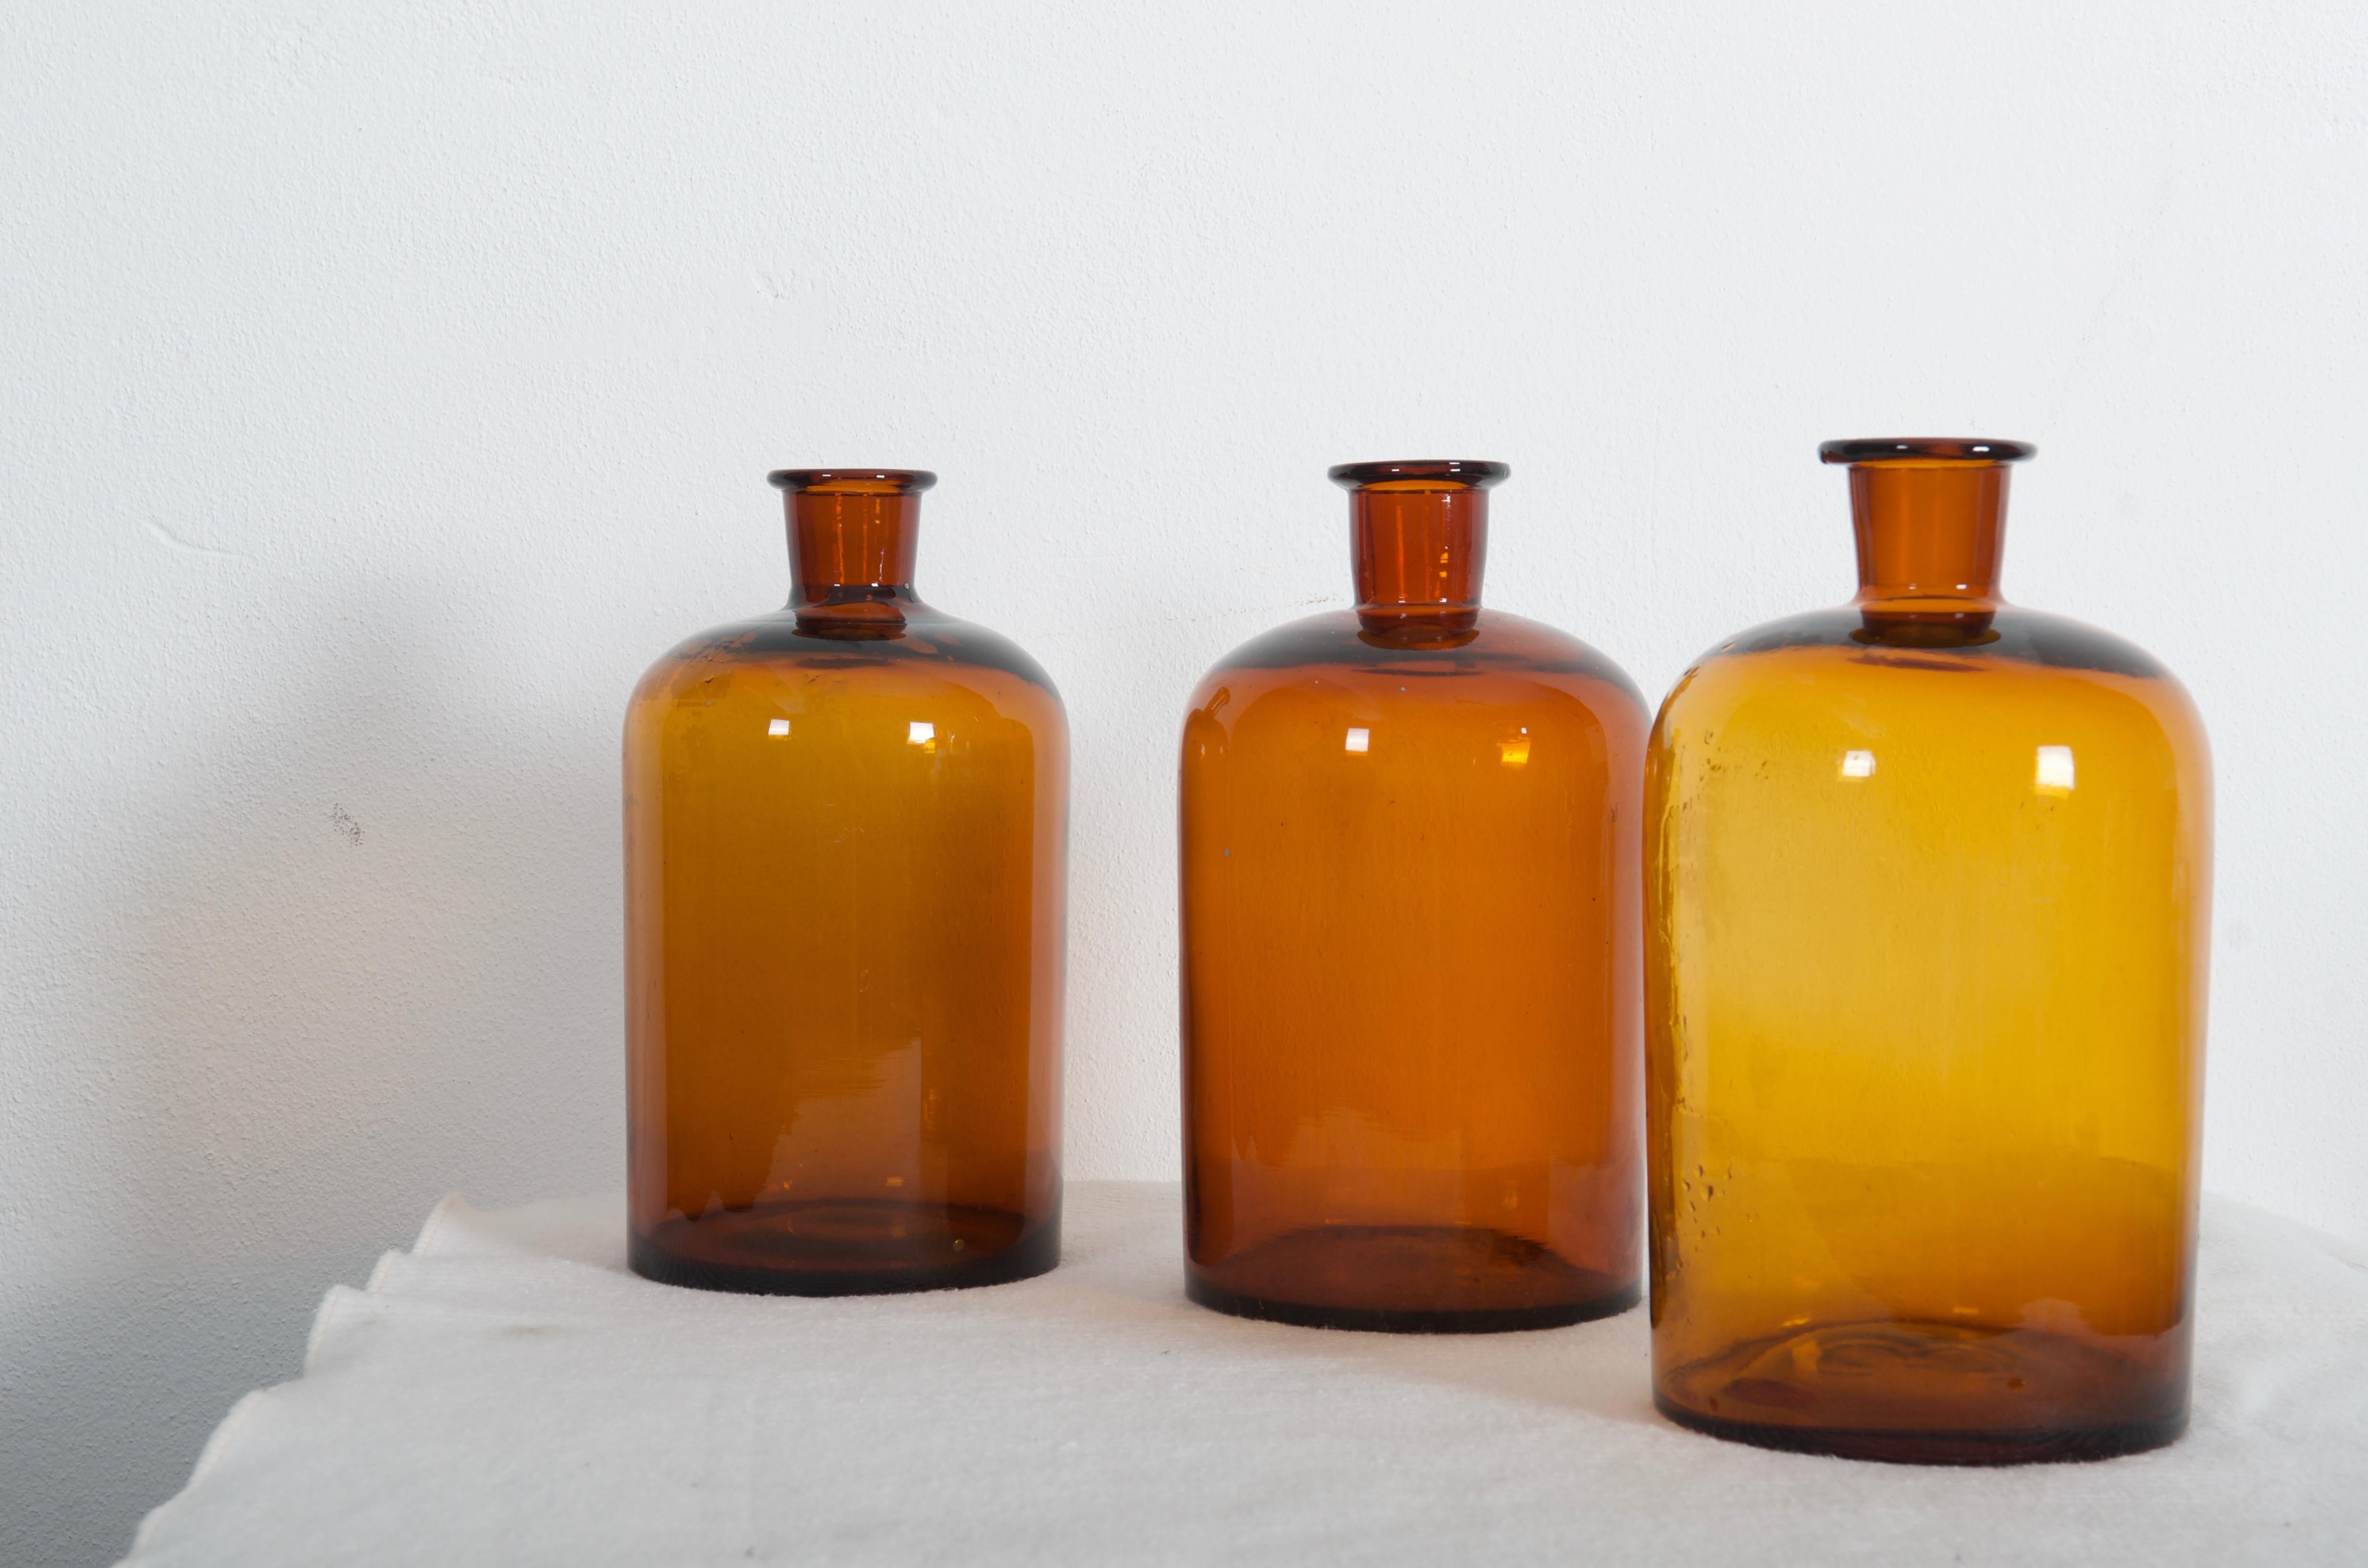 Large Square Apothecary Amber Bottle